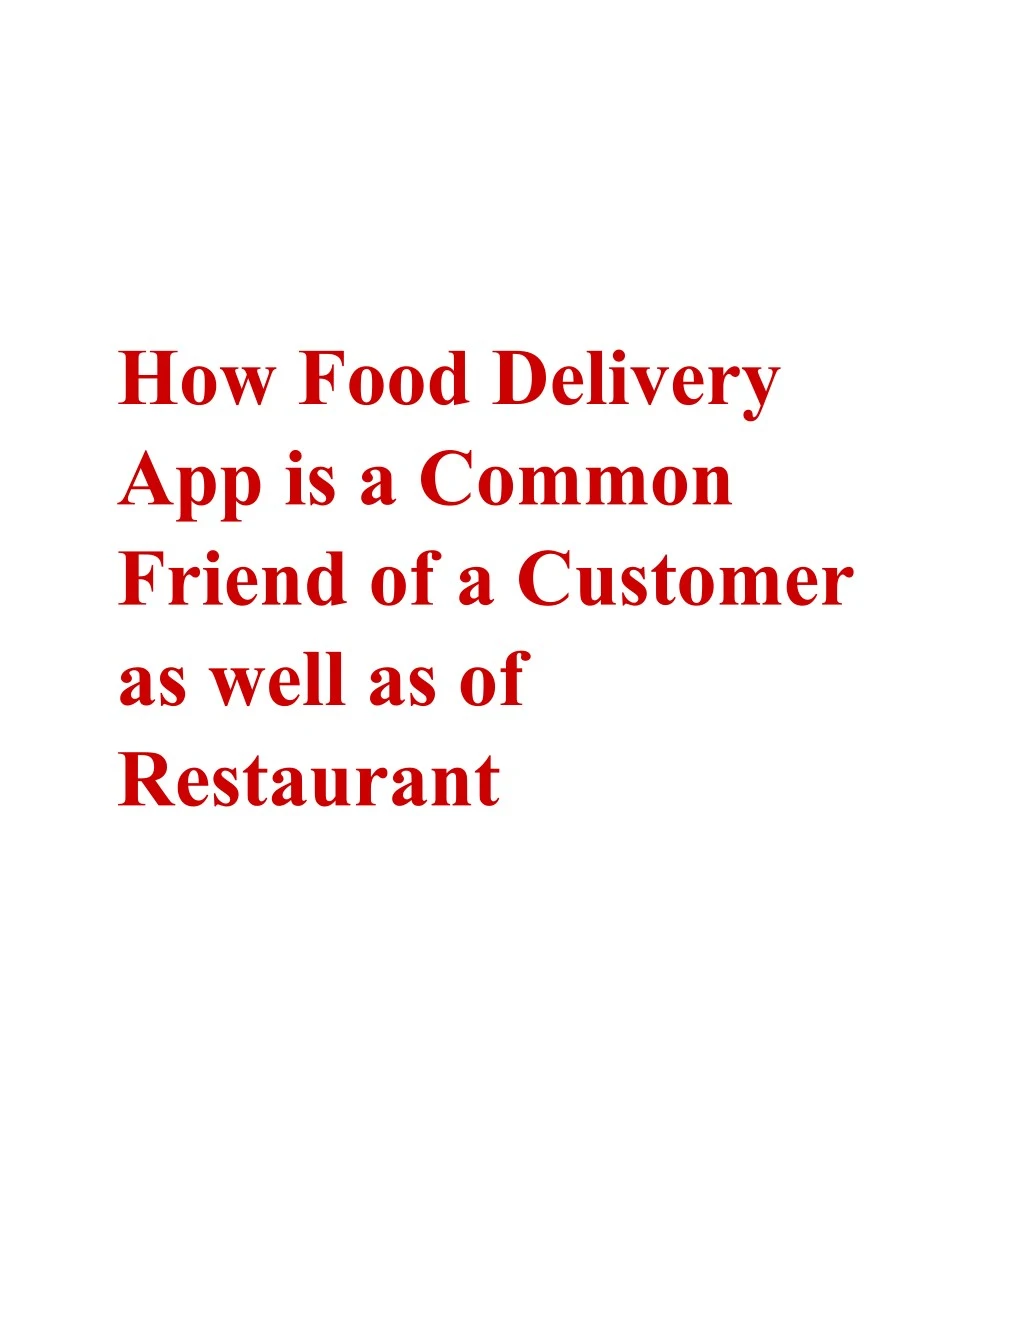 how food delivery app is a common friend